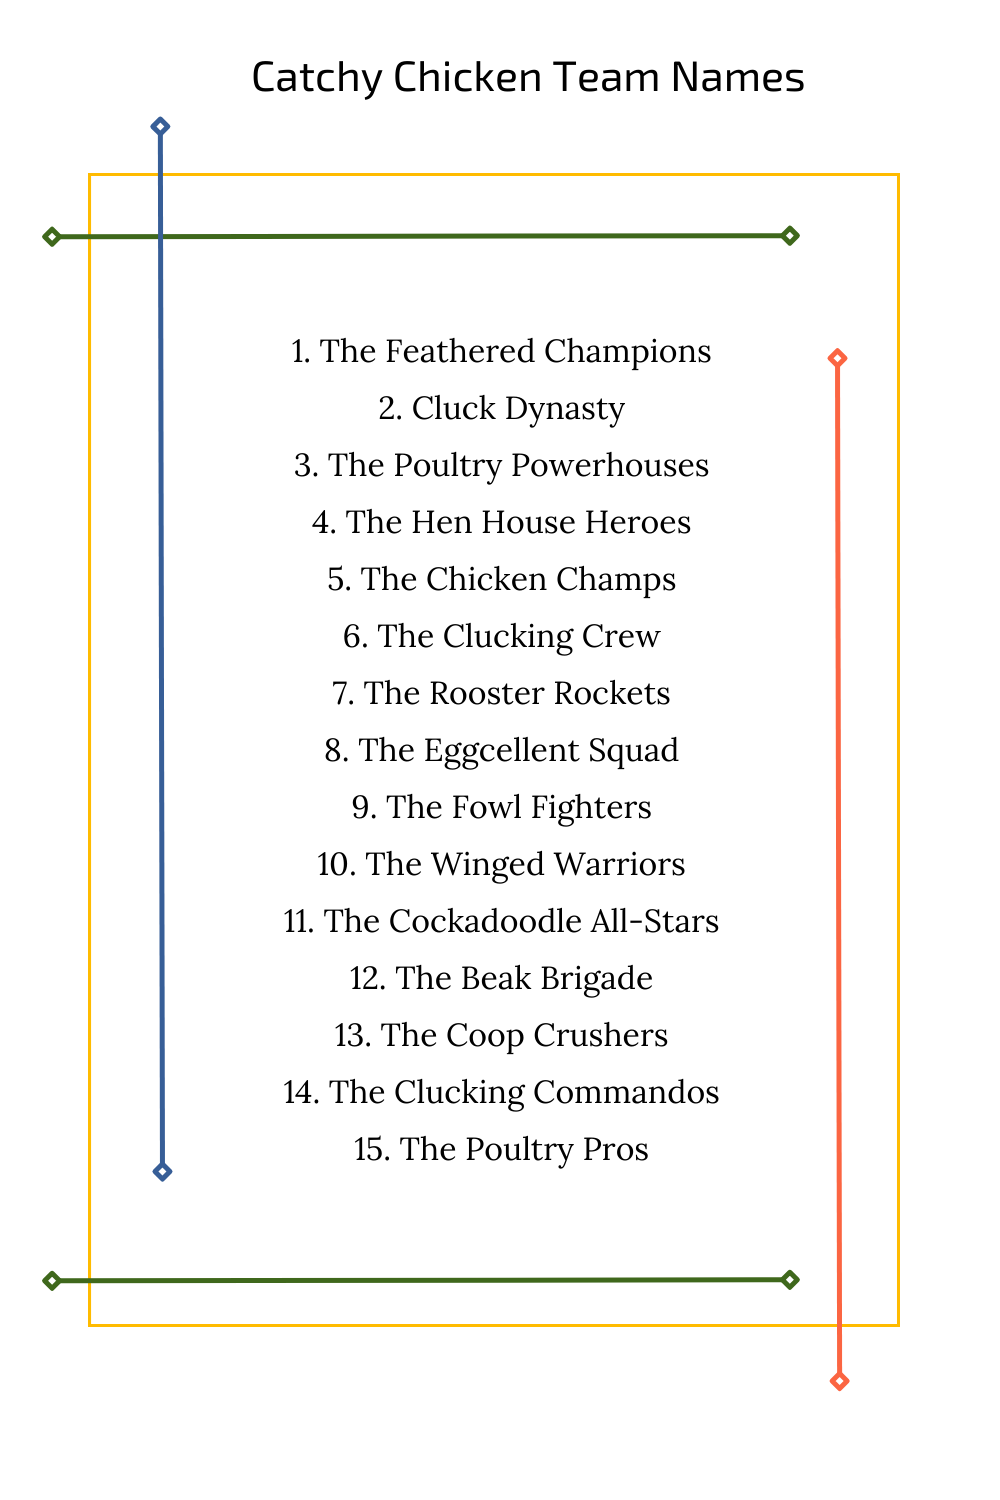 Catchy Chicken Team Names